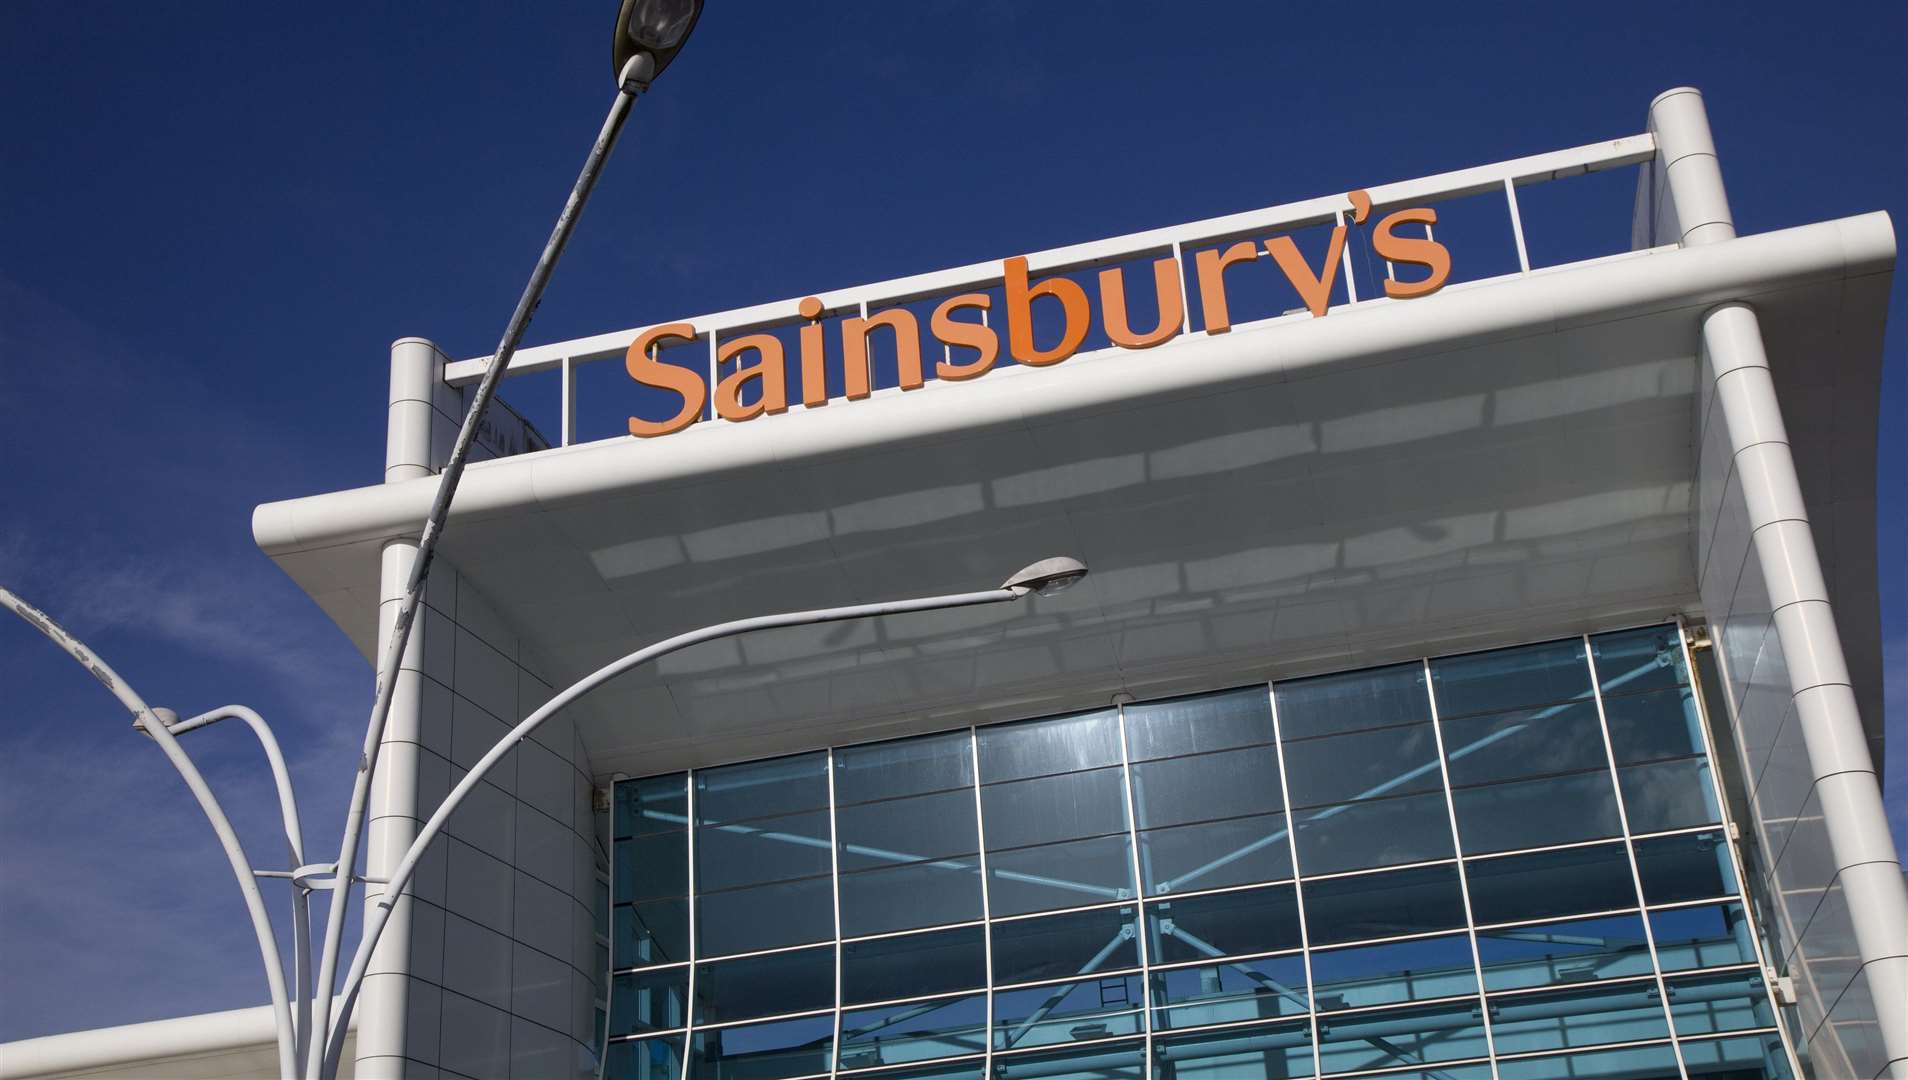 Sainsbury's was among the six supermarkets studied